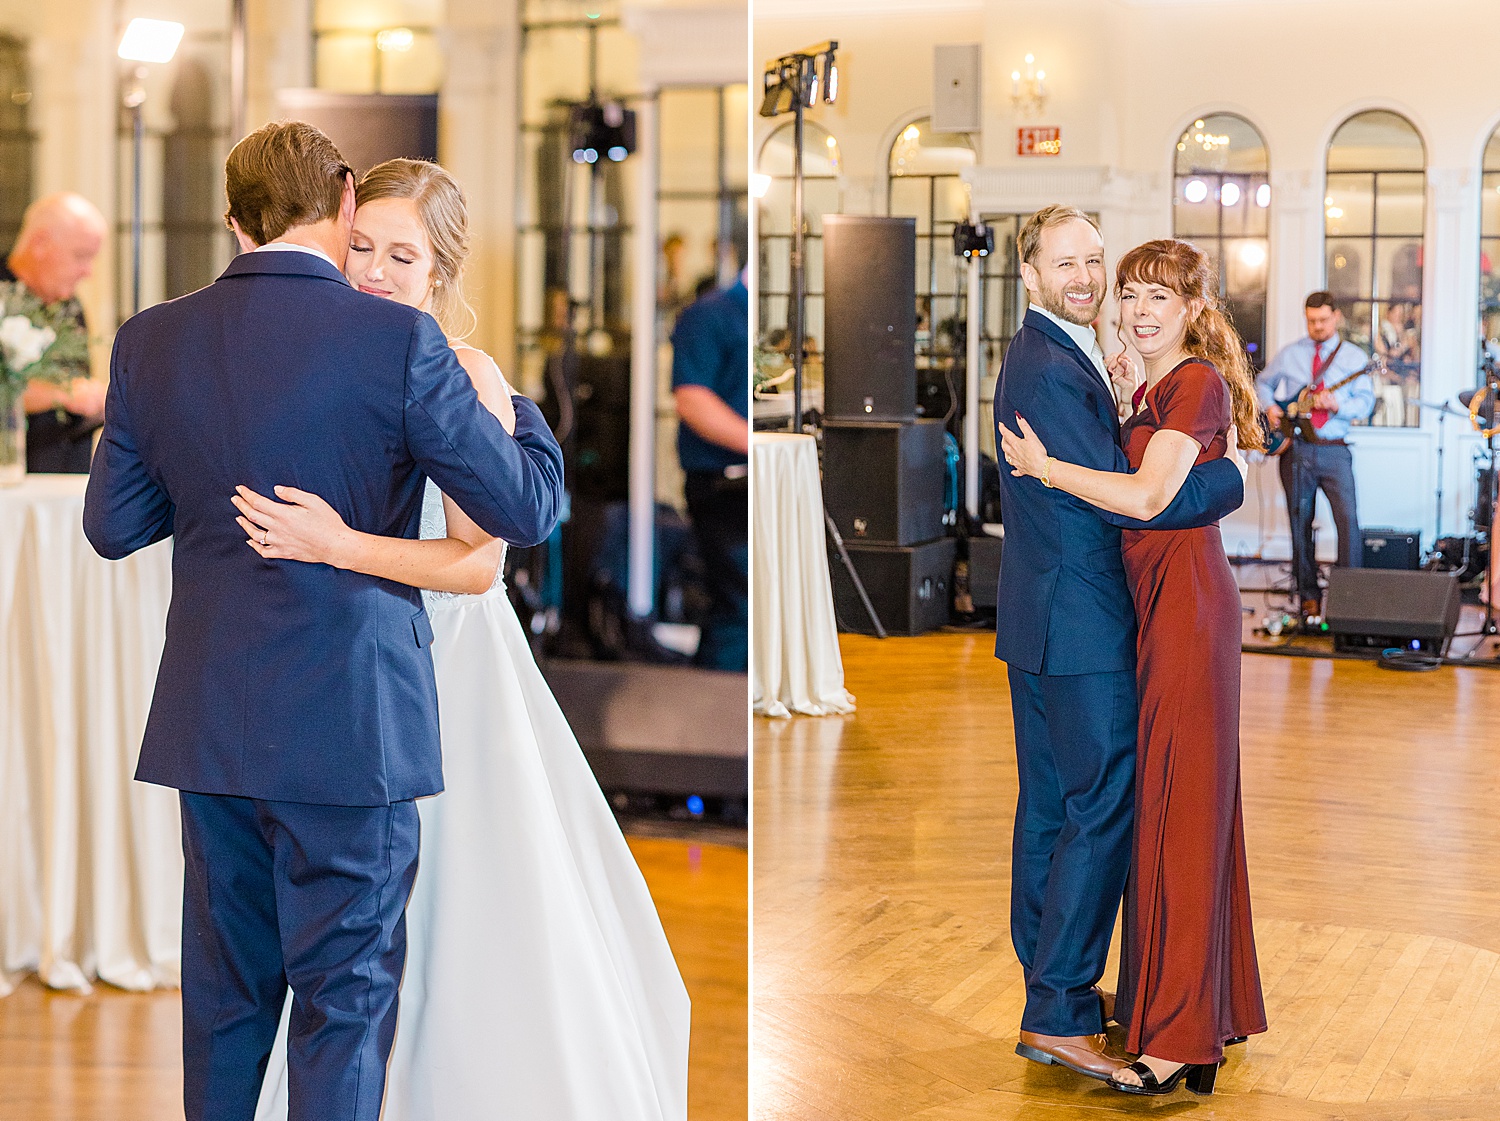 bride dances with her dad and groom dances with her mom